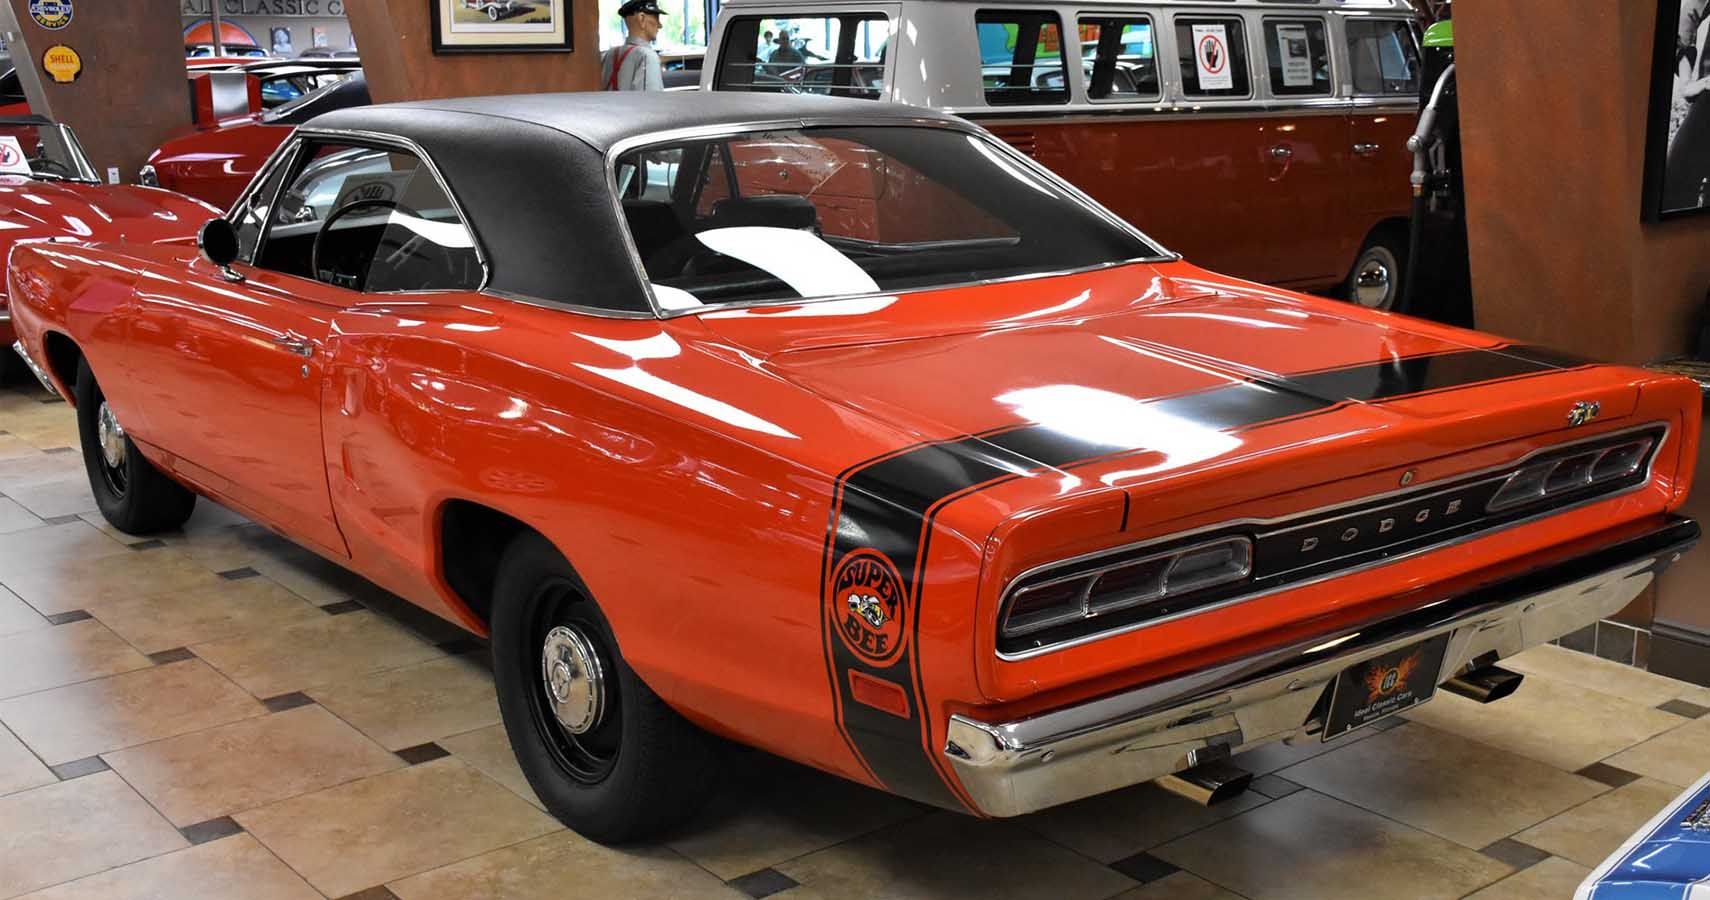 1969 ½ Dodge Super Bee A12 parked indoors